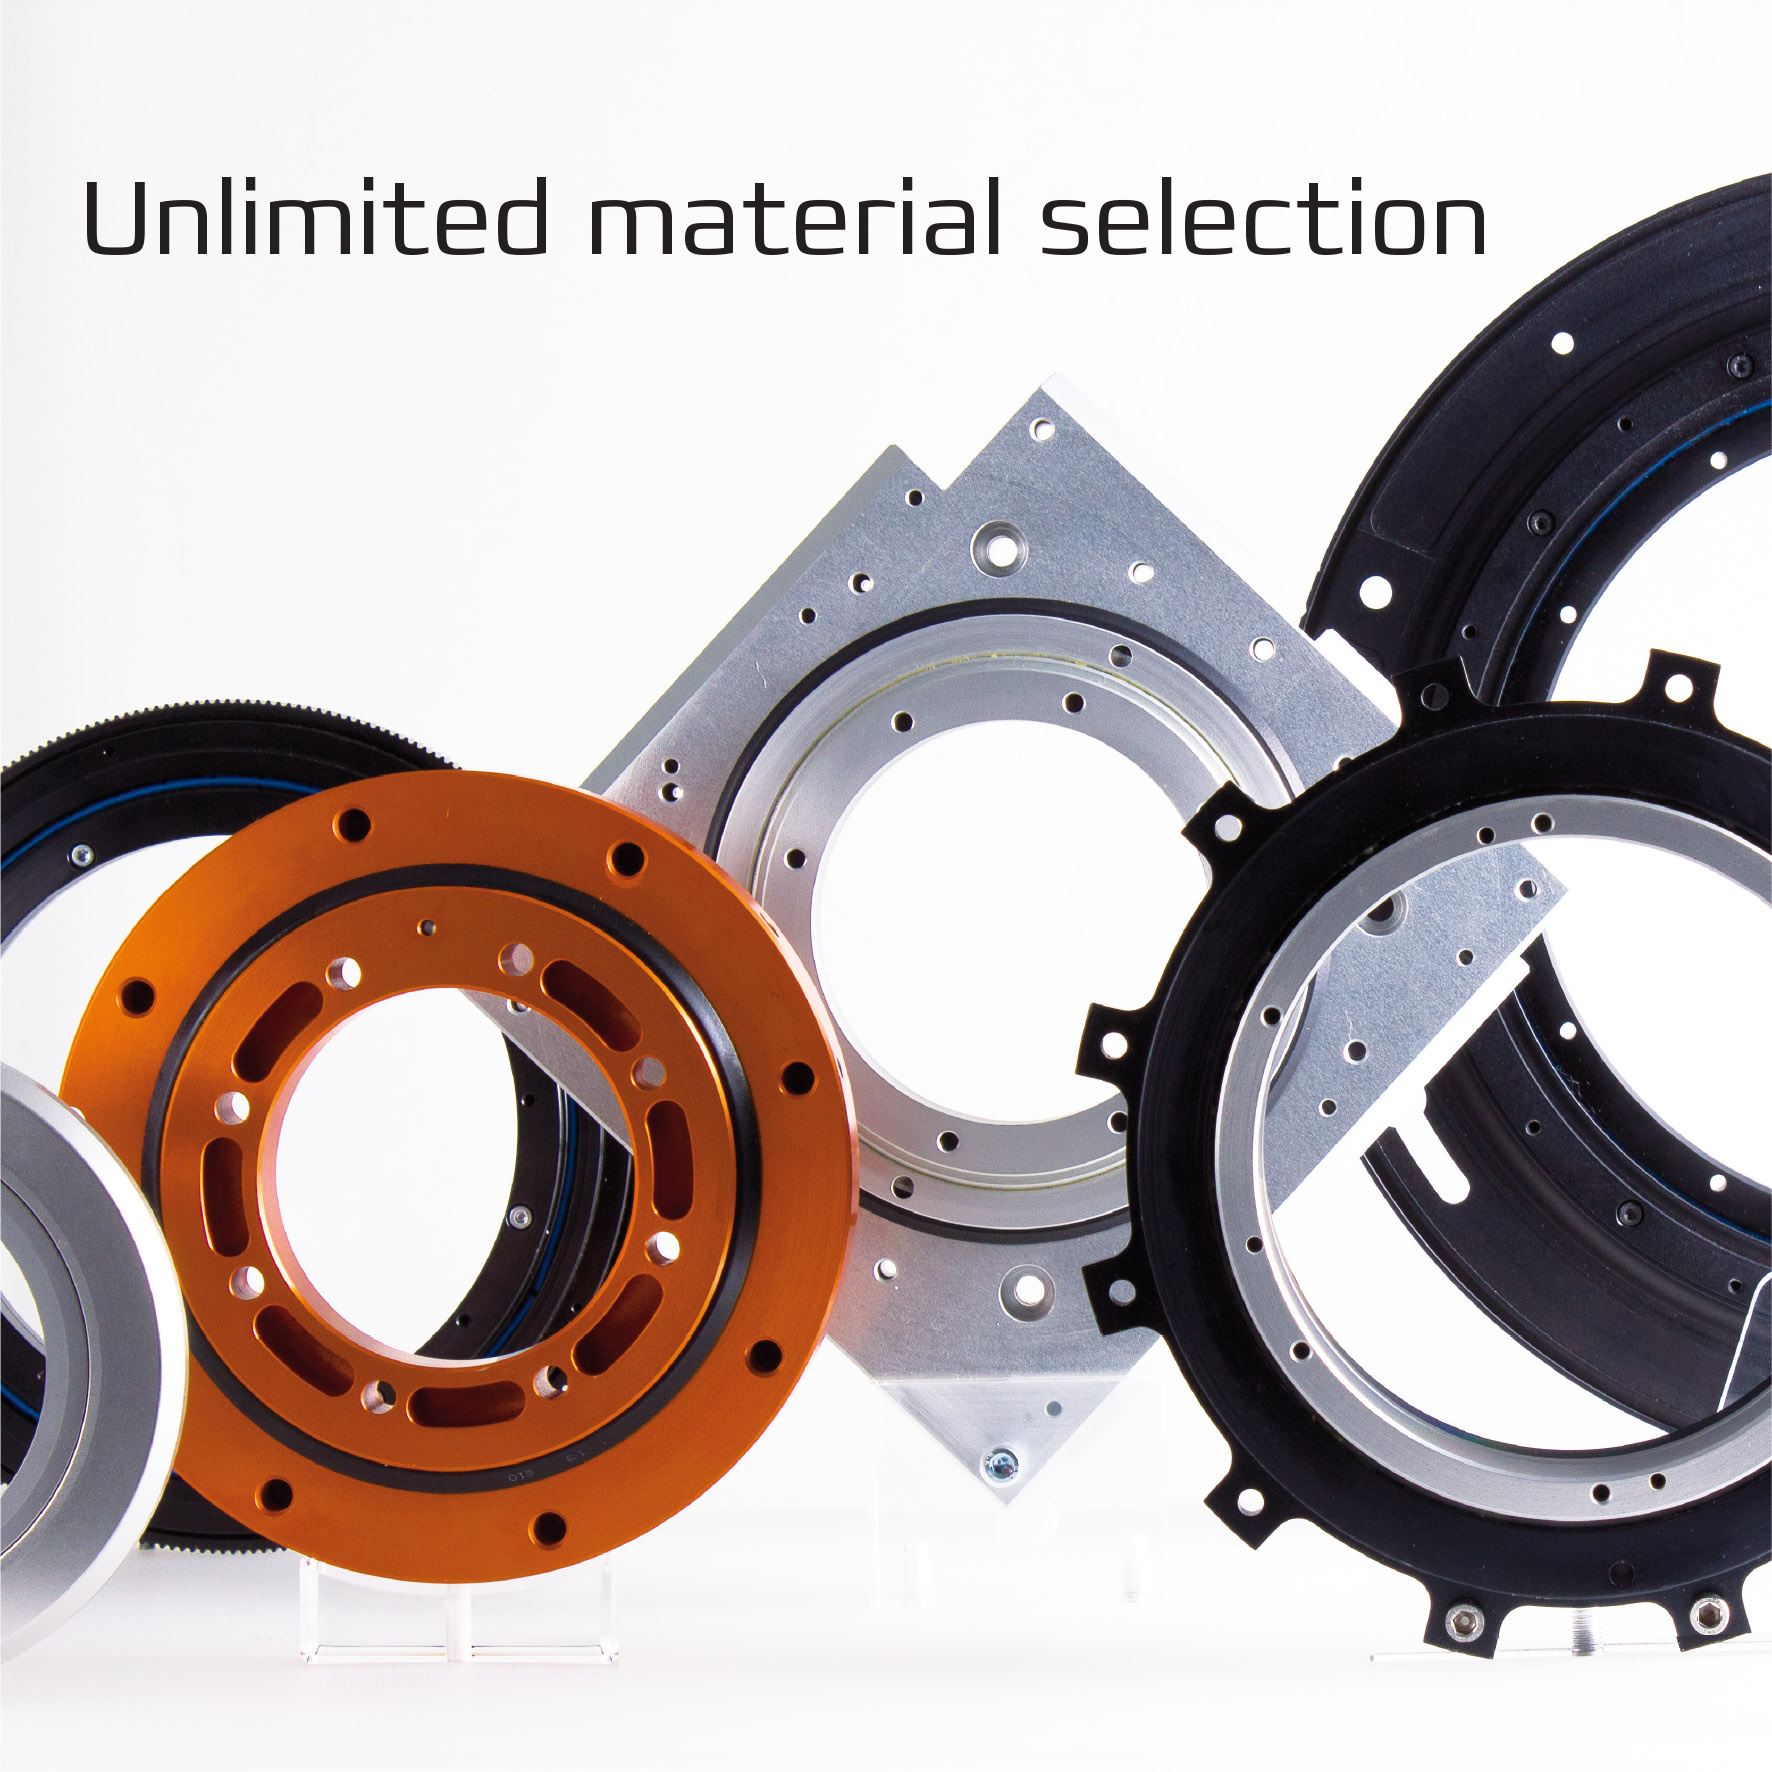 unlimited materials example of bearings